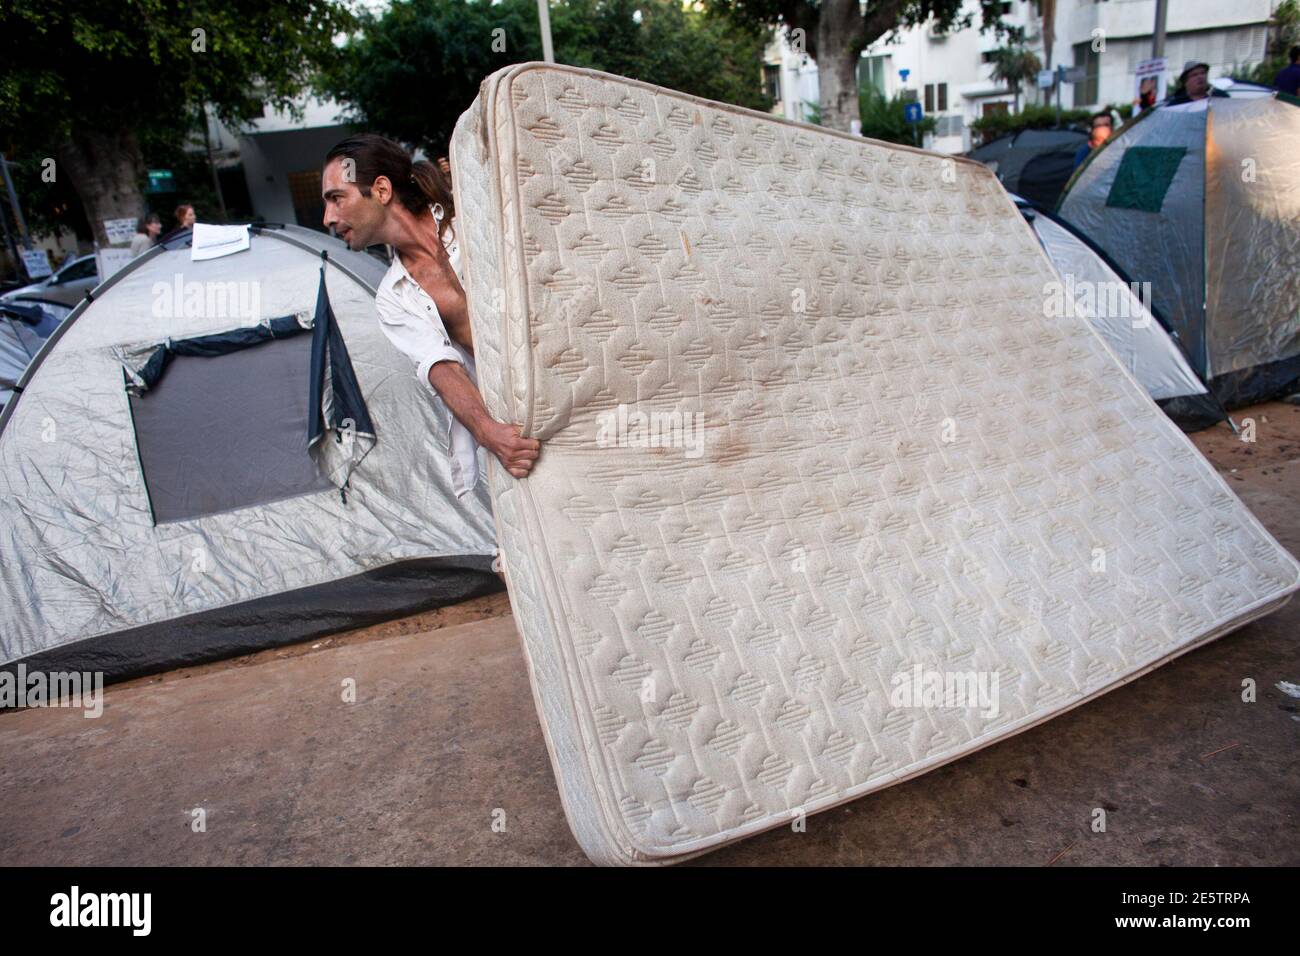 An Israeli protester carries a mattress near tents pitched on Tel Aviv's Rothschild Boulevard during a demonstration against high housing prices, July 18, 2011. Similar protests have been planned in other Israeli cities where rental costs have skyrocketed as a result of a shortage in available dwellings in primary locations. REUTERS/Nir Elias (ISRAEL - Tags: POLITICS BUSINESS SOCIETY) Stock Photo